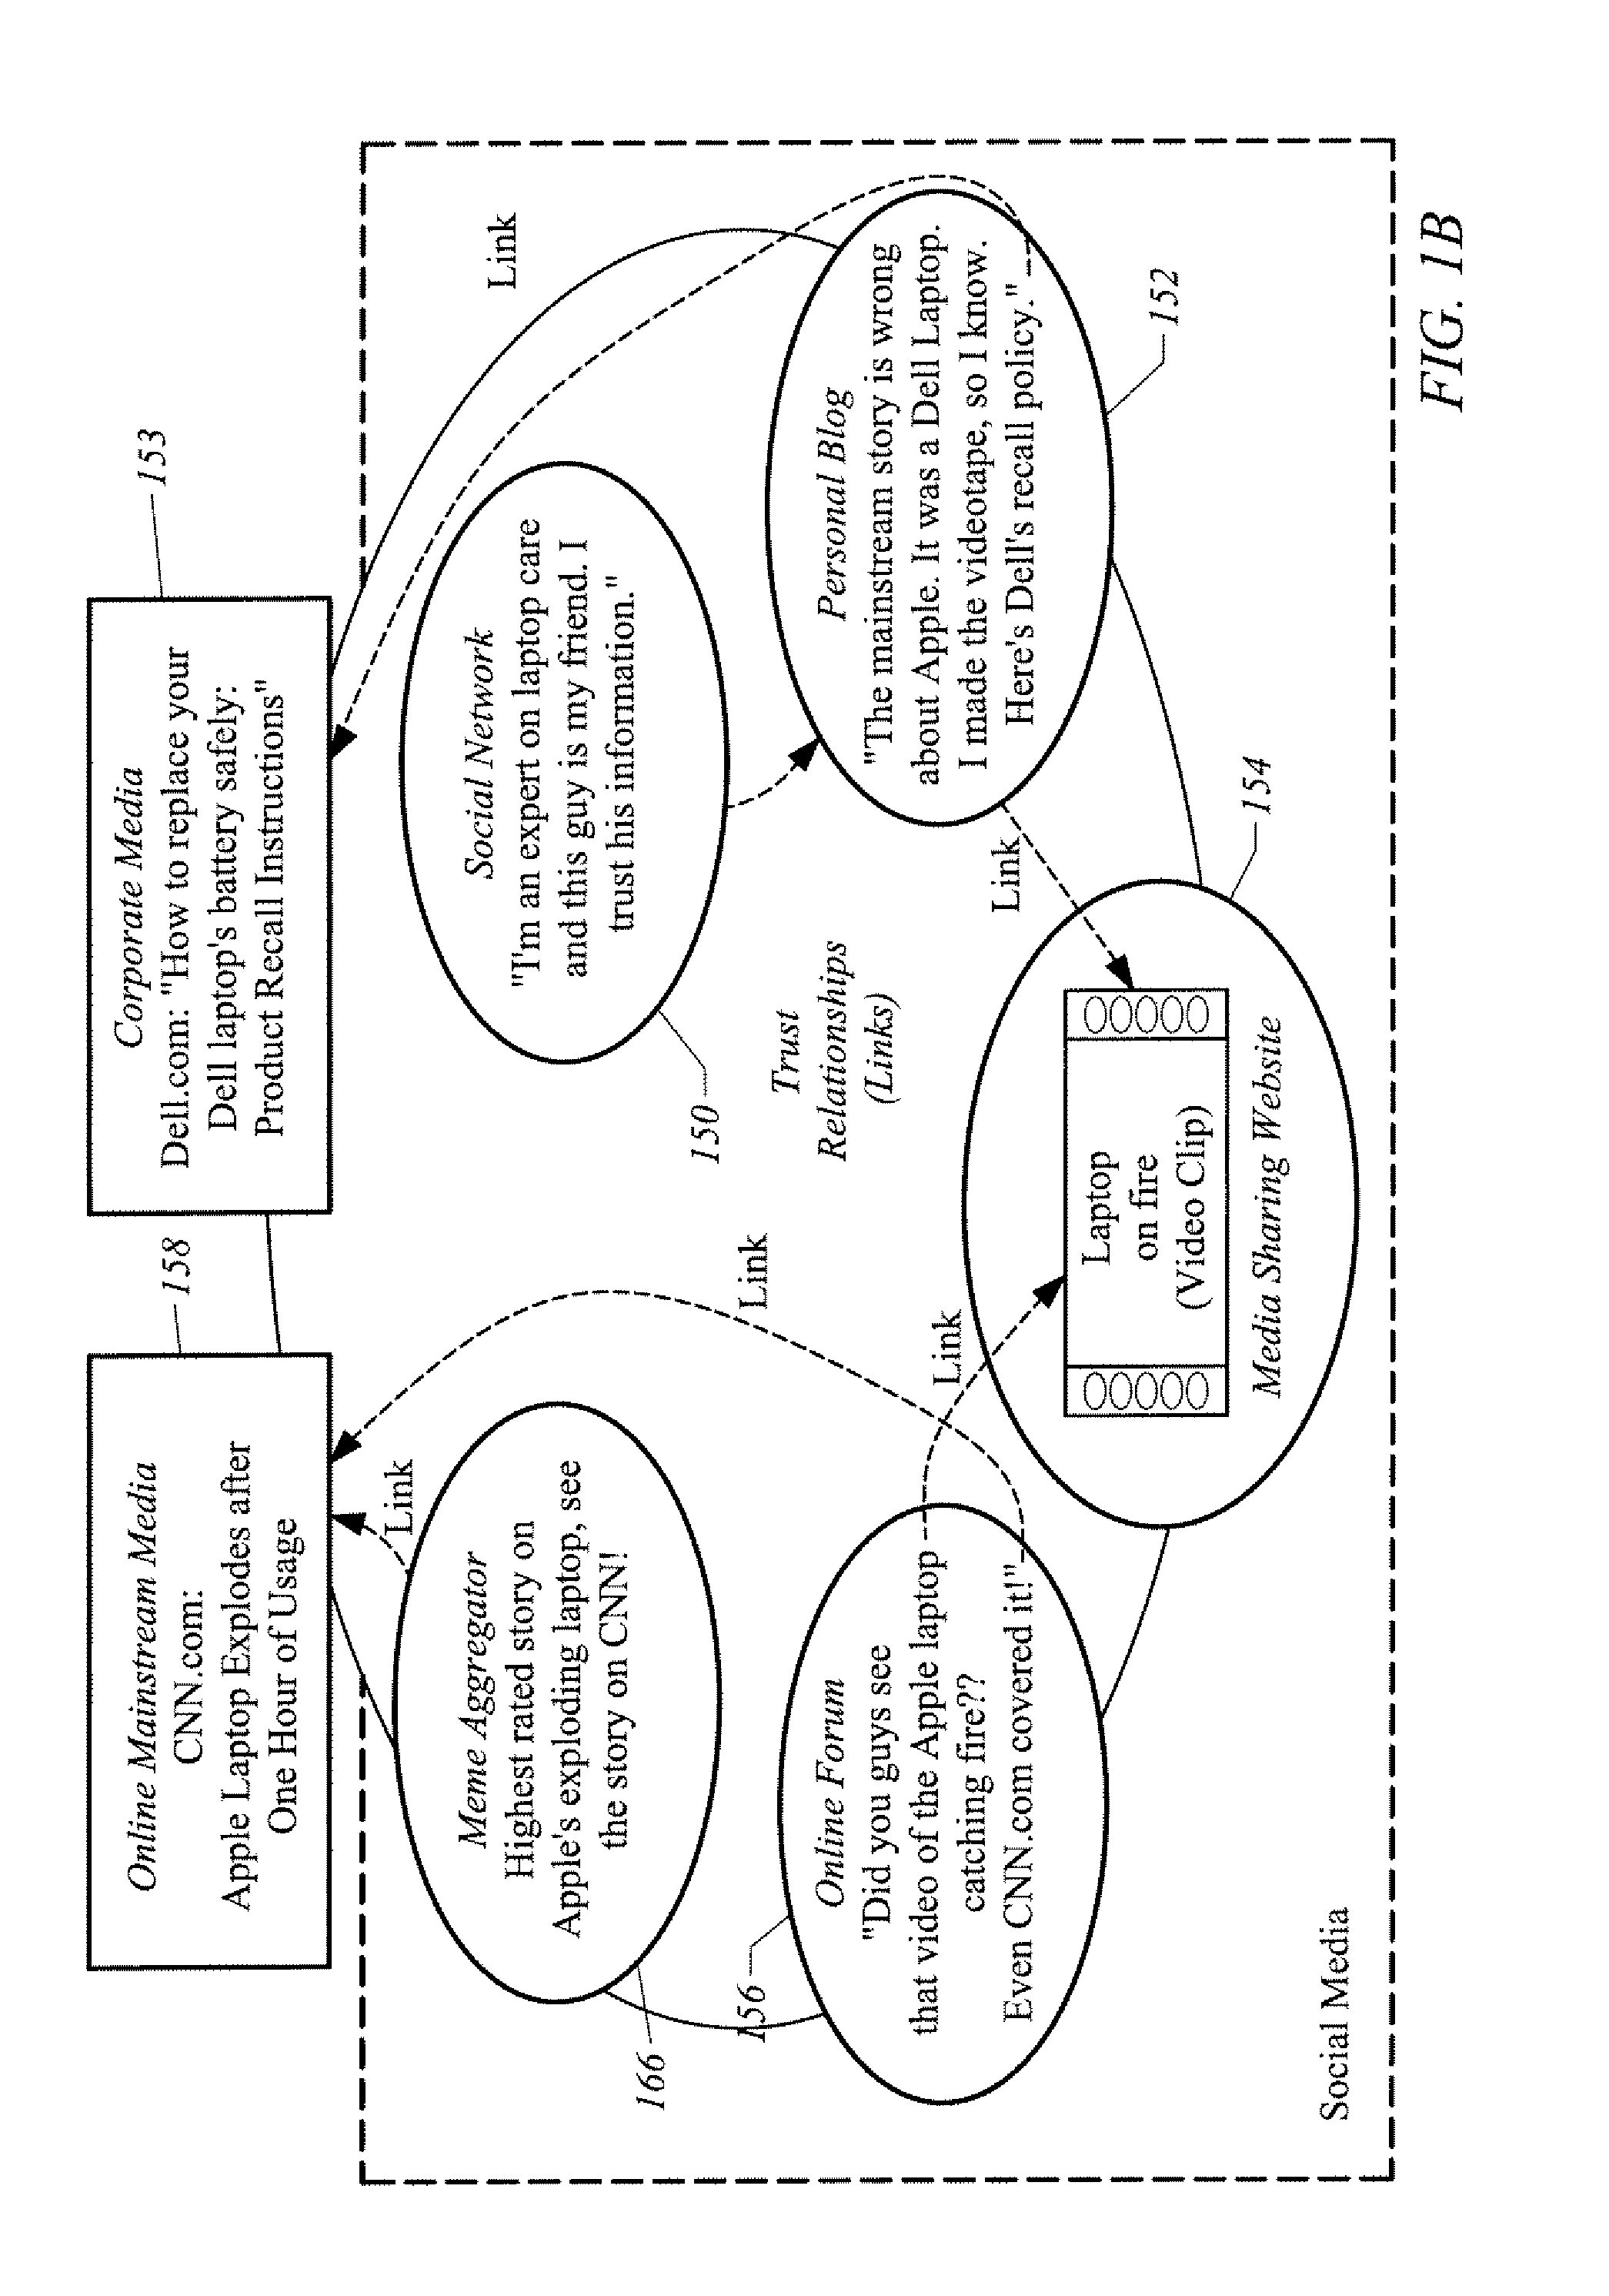 Social Analytics System and Method For Analyzing Conversations in Social Media